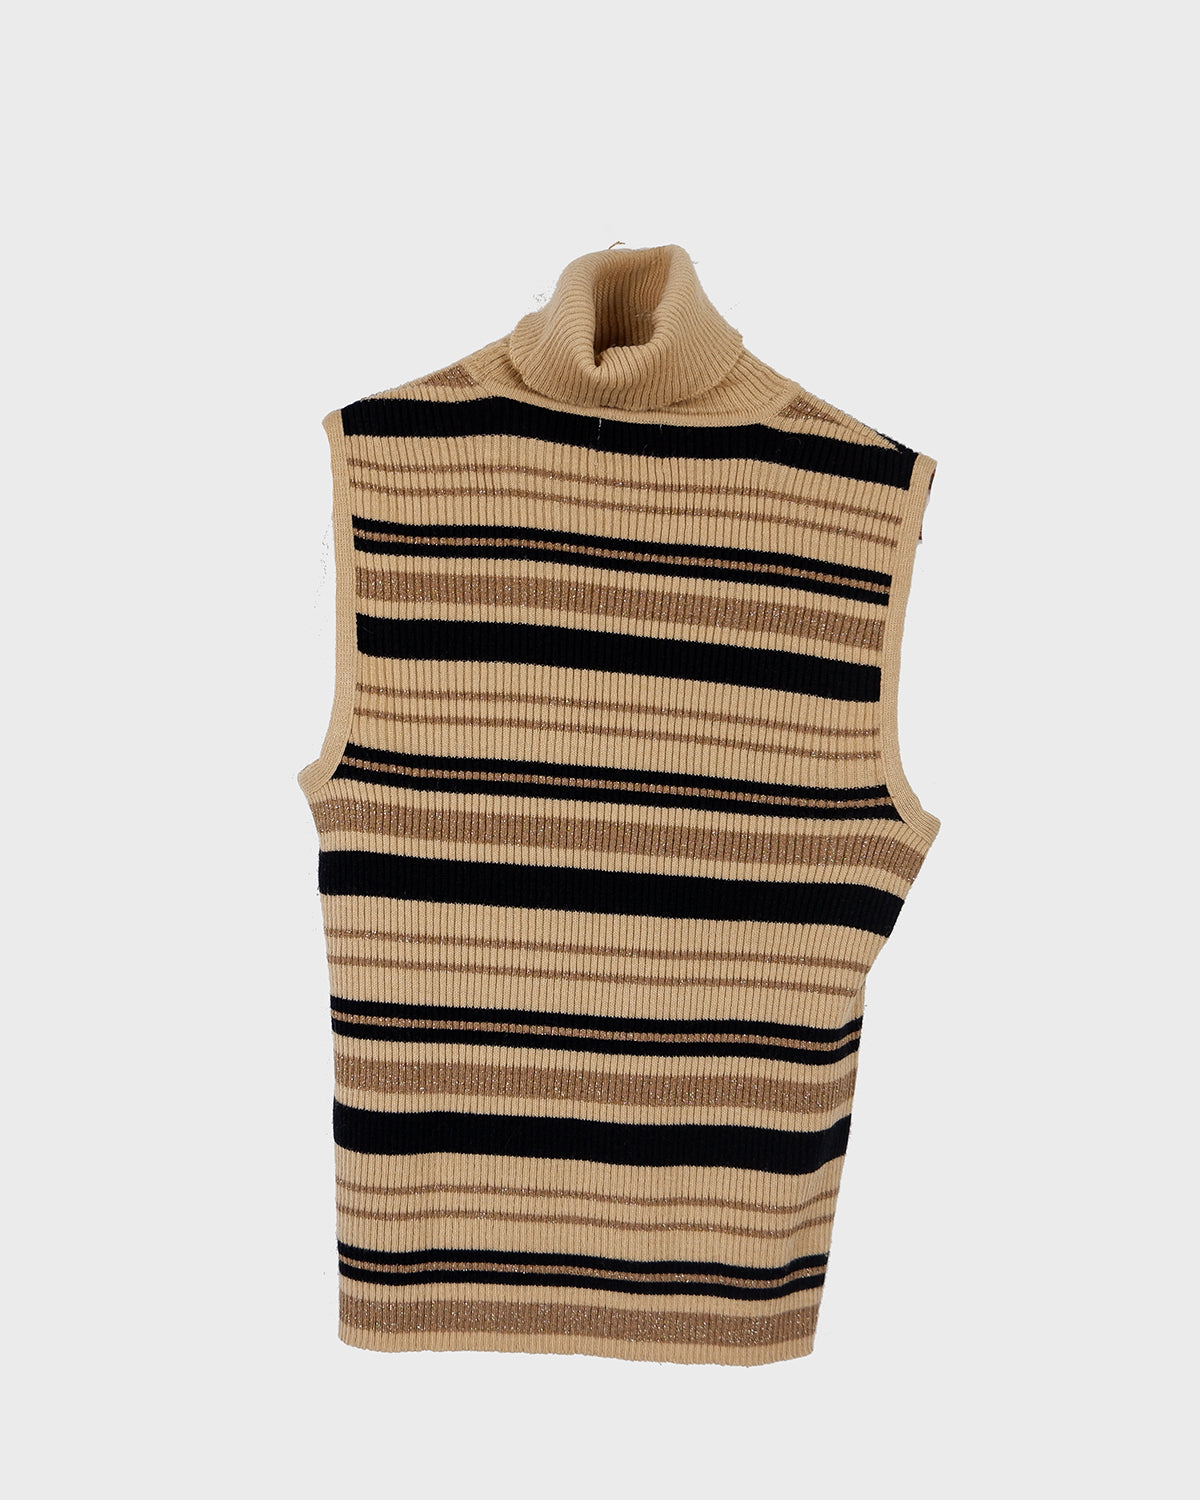 Get ready to slip into this vintage 90s shimmering brown striped turtleneck slipover!